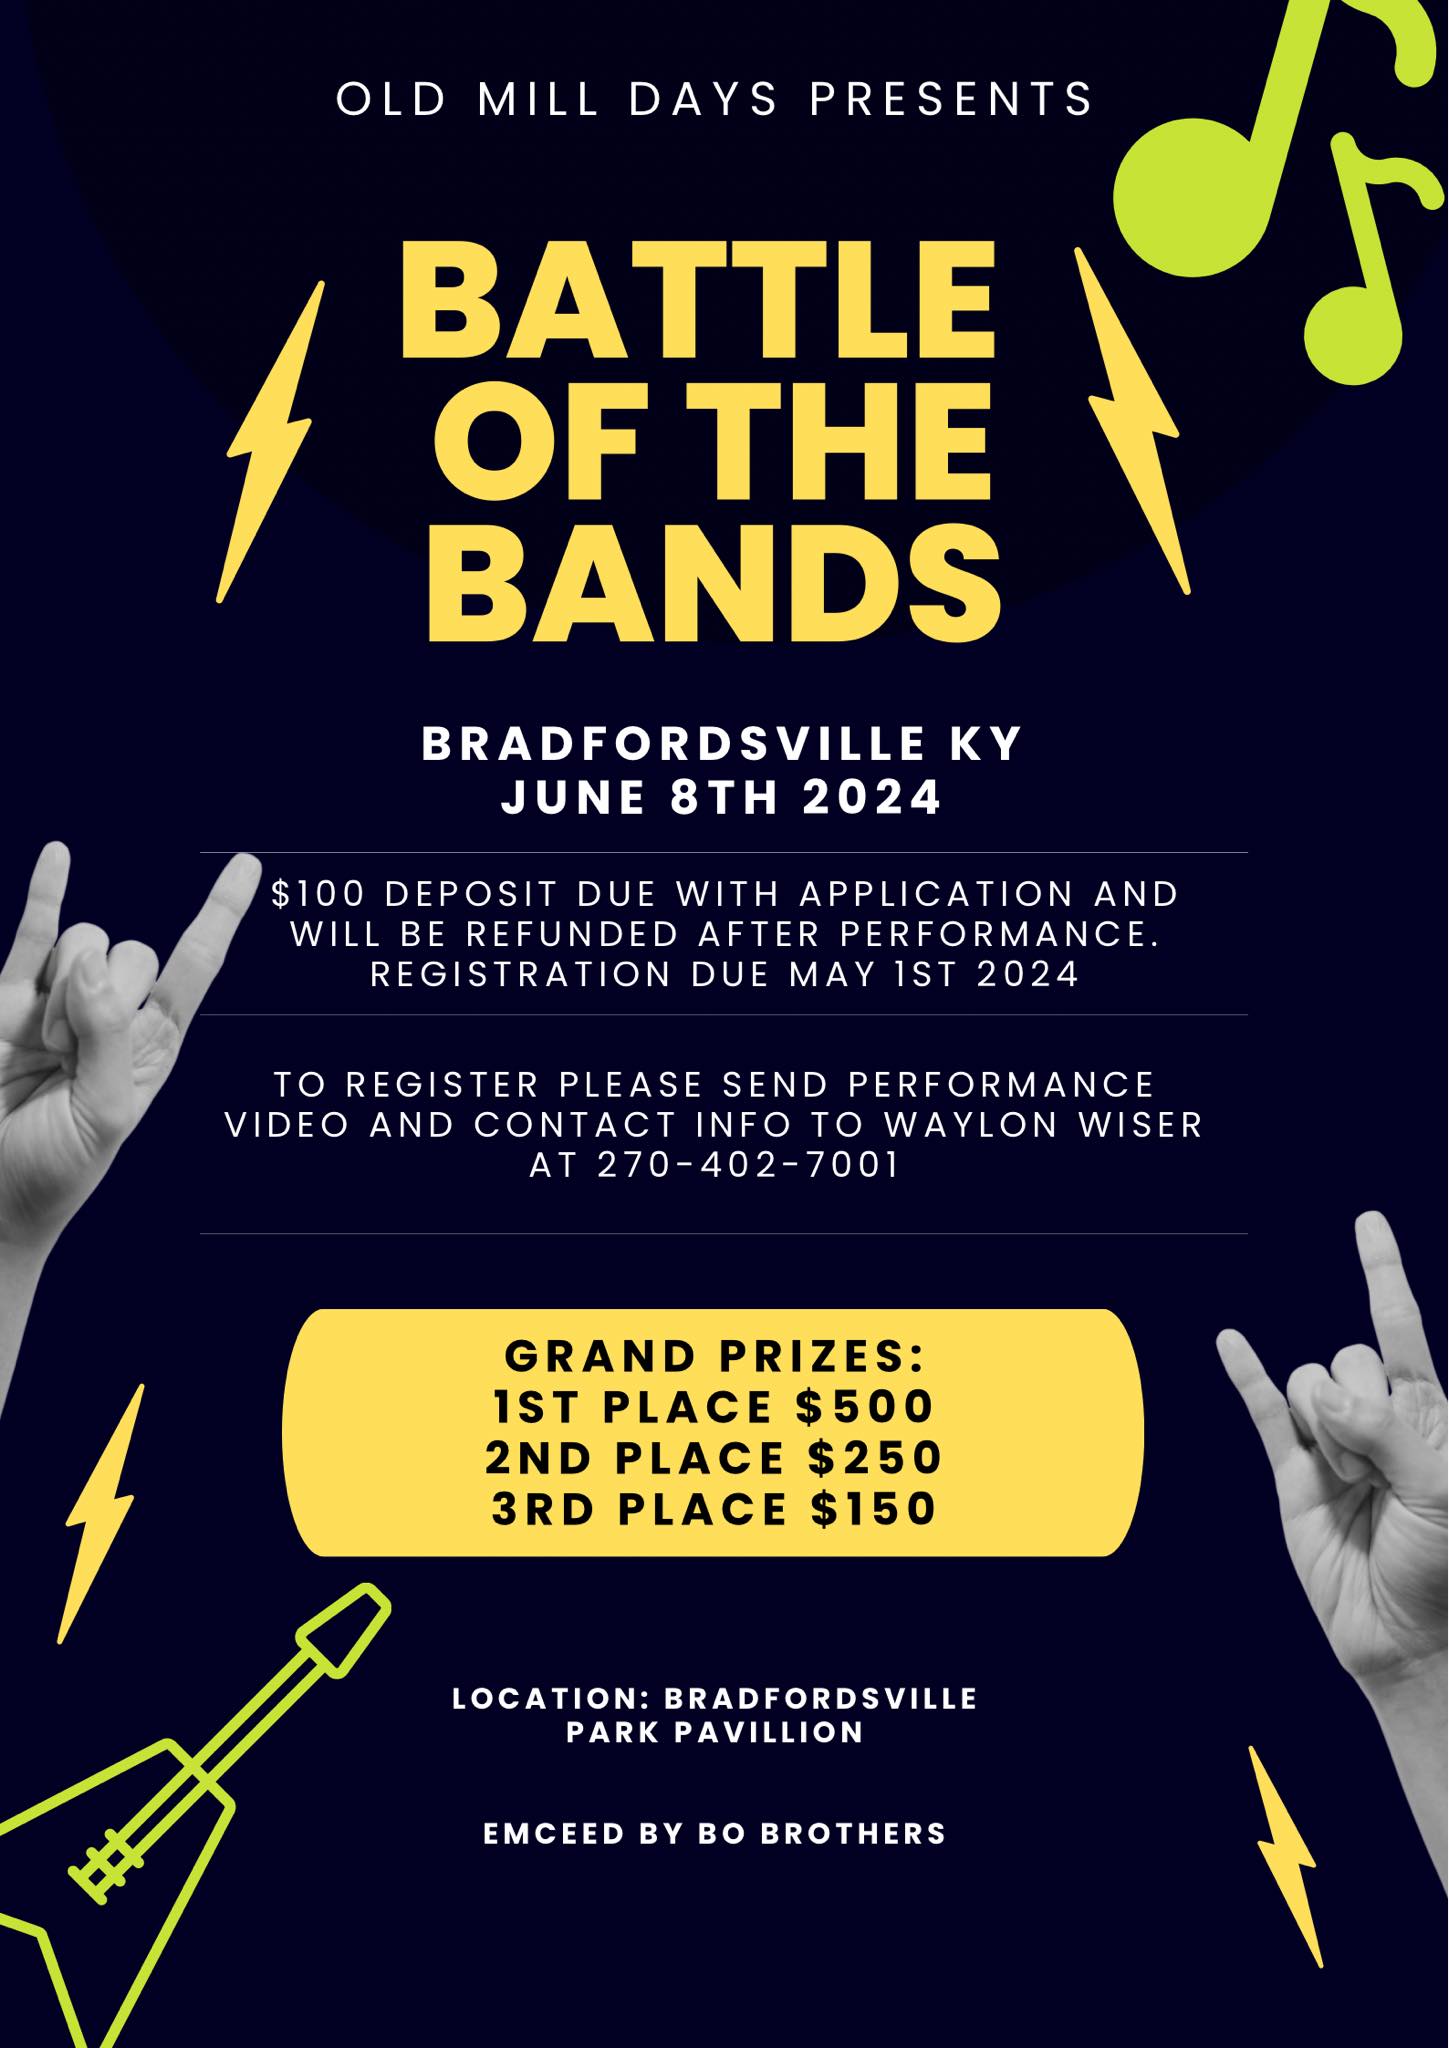 Old Mill Days Presents Battle of the Bands 2024